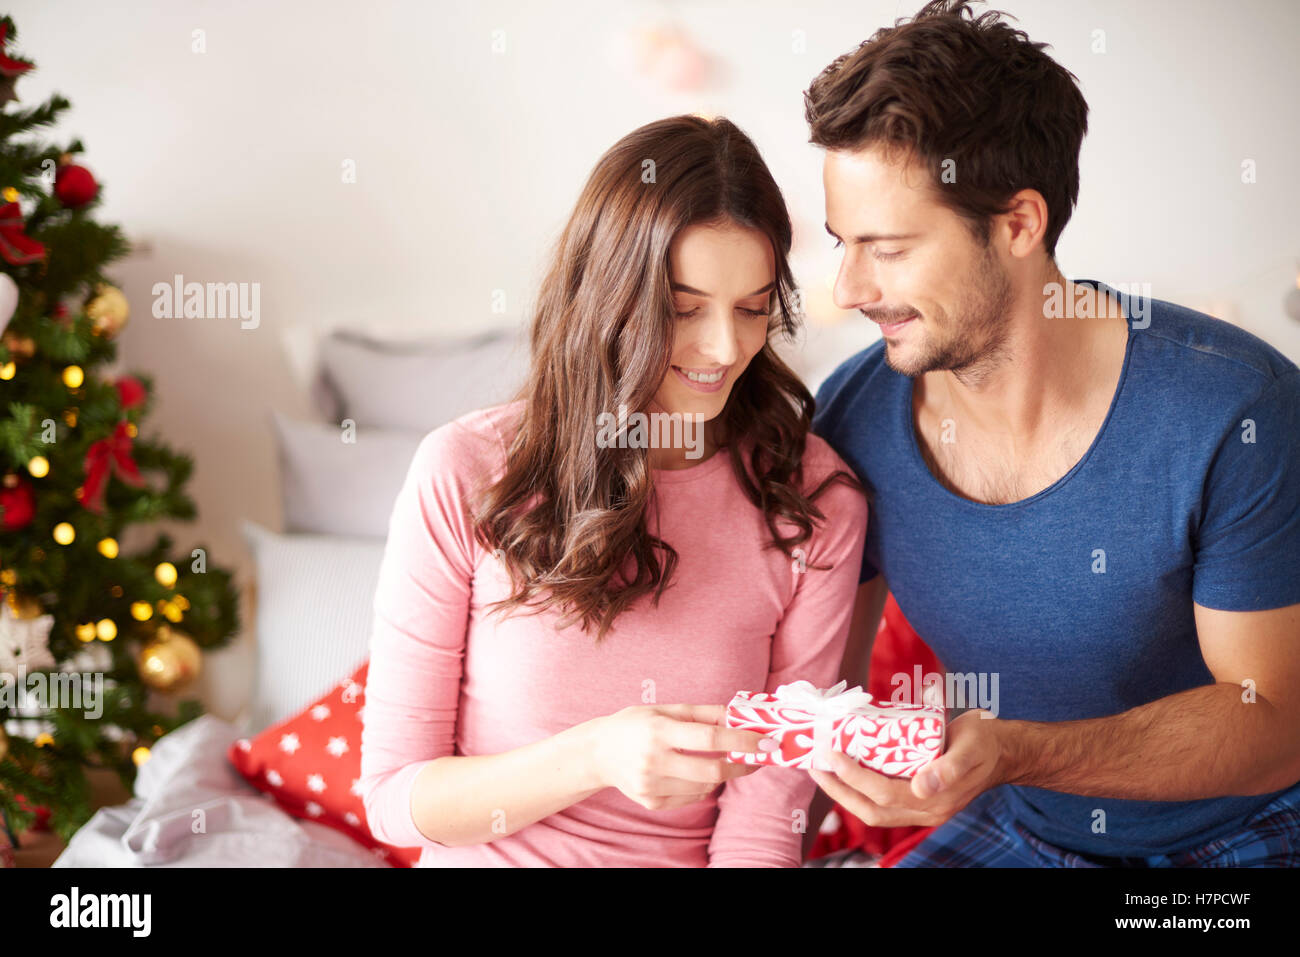 Giving the Christmas presents with love Stock Photo